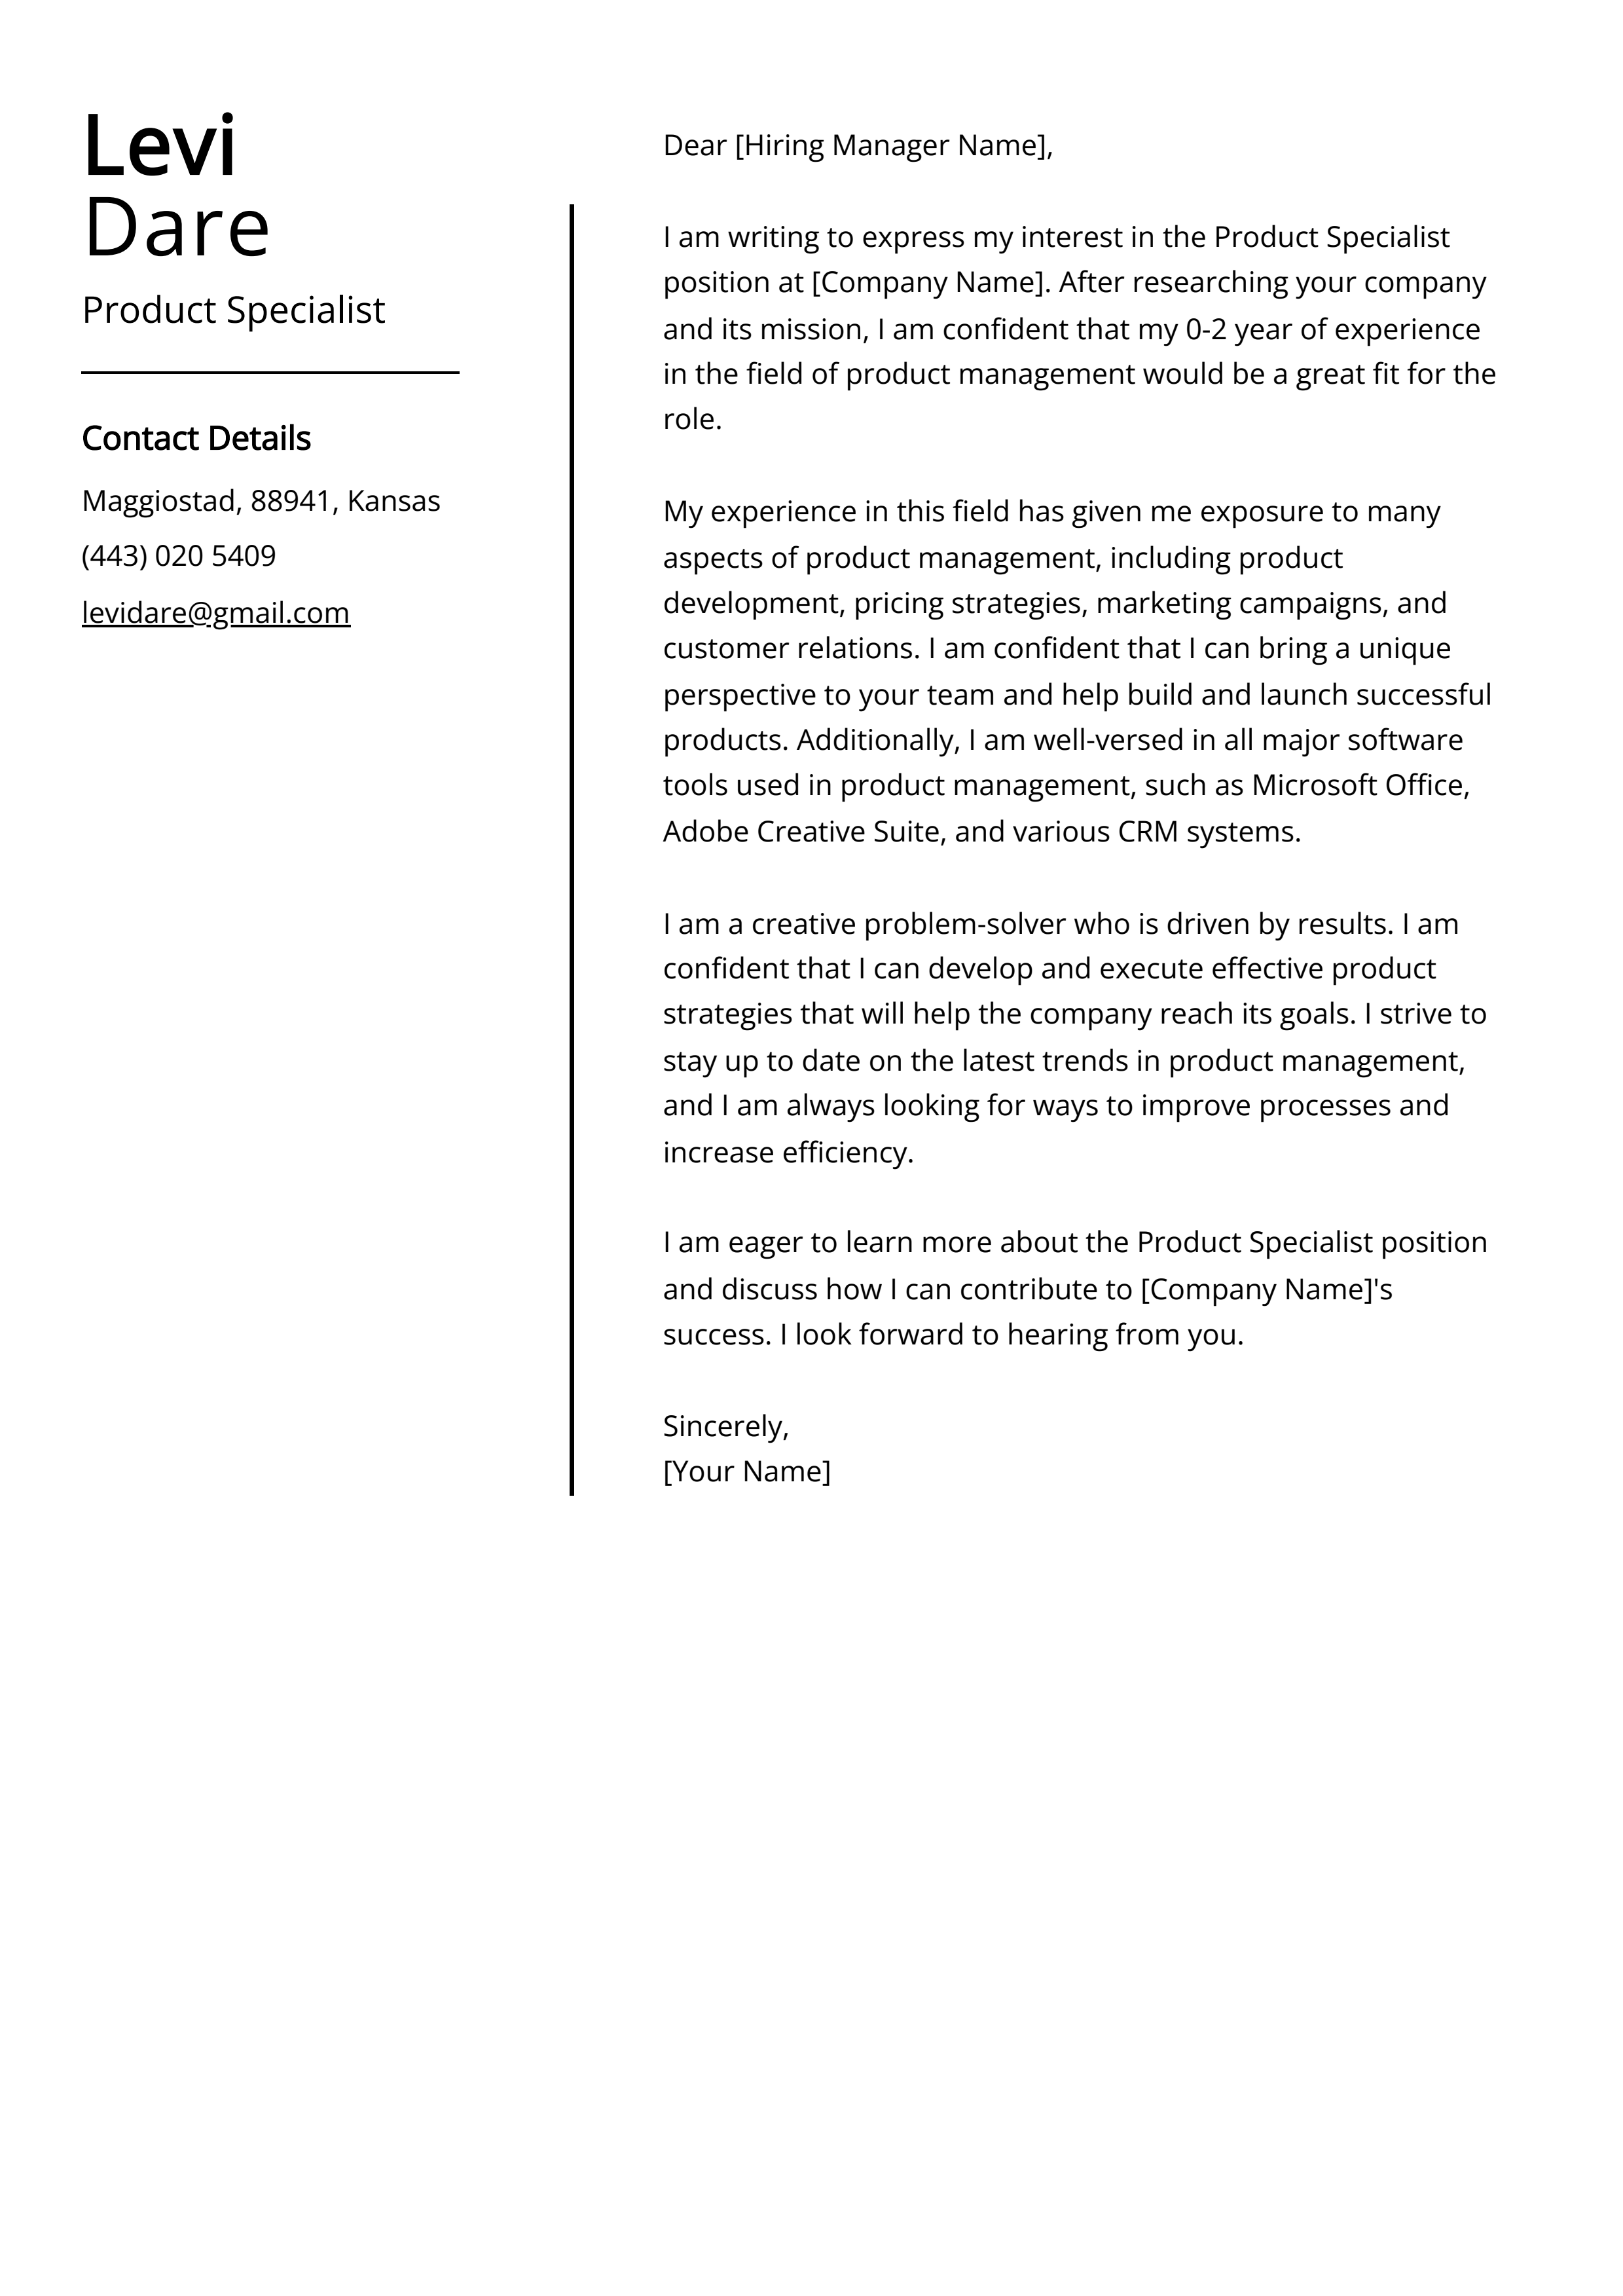 Product Specialist Cover Letter Example